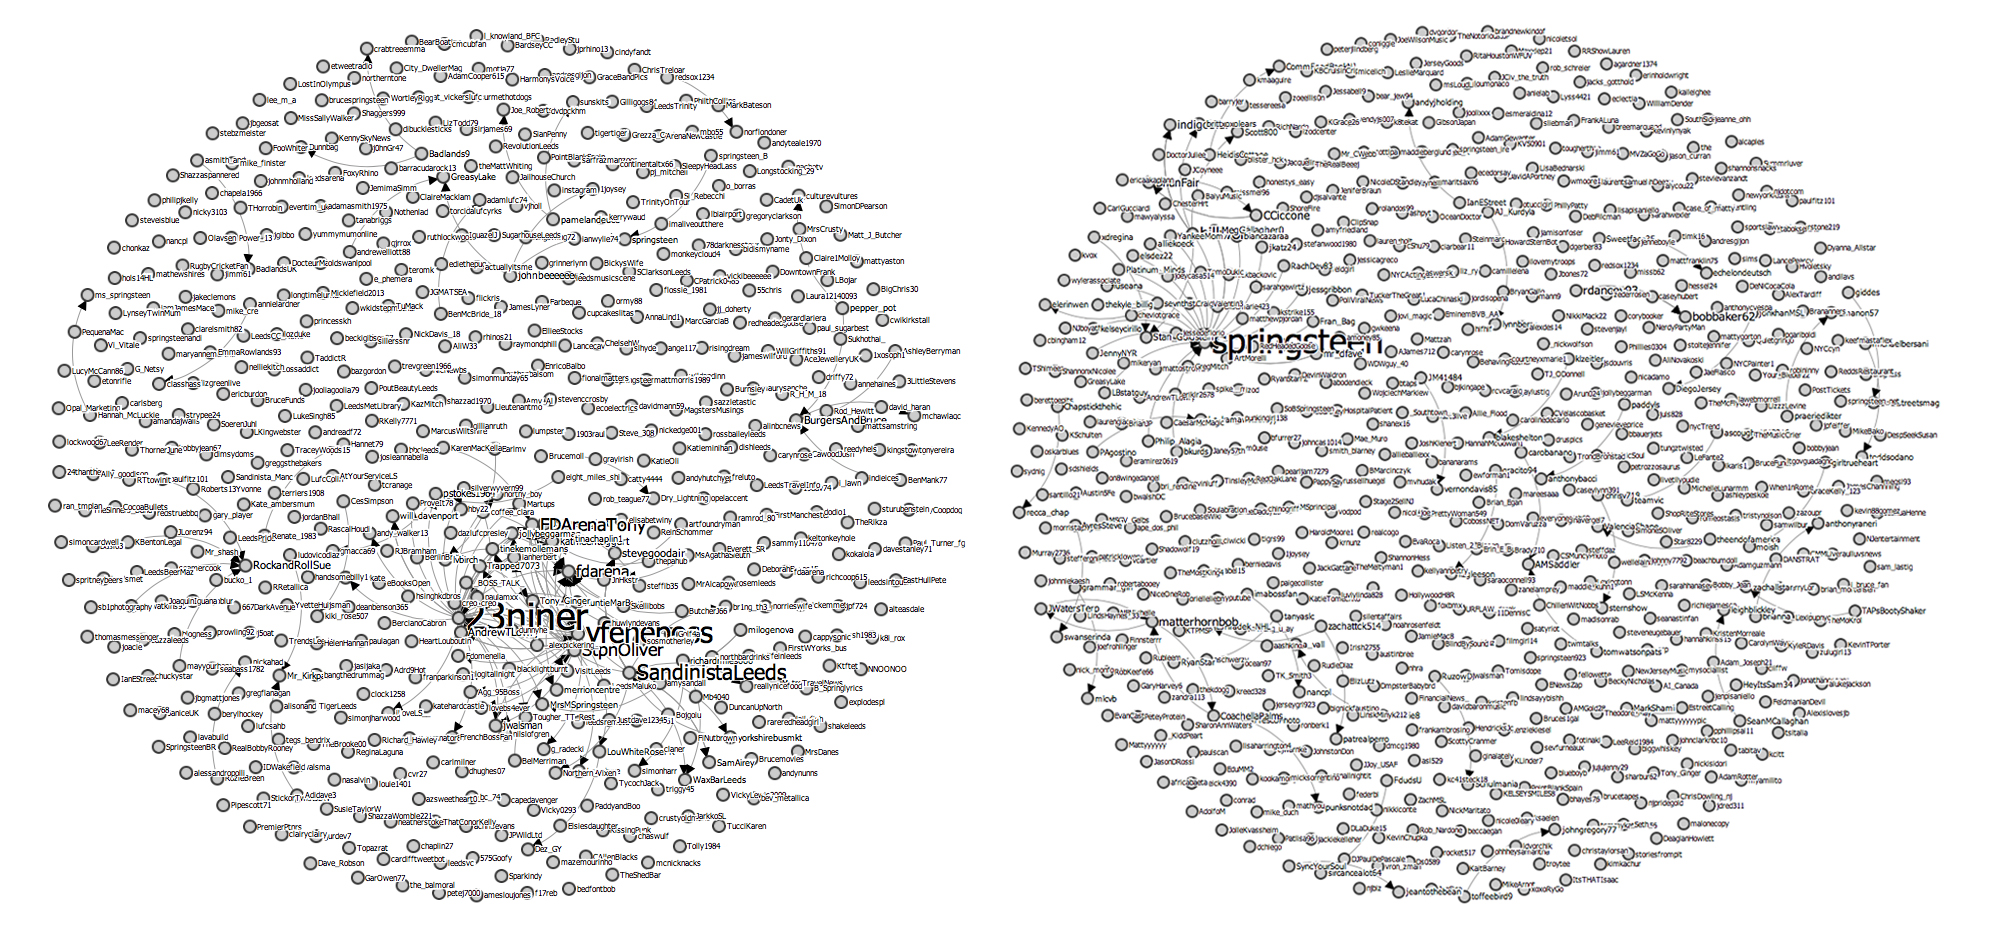 side-by-side comparisons of visualizations of the Izod show and #bruceleeds hashtag corpuses.